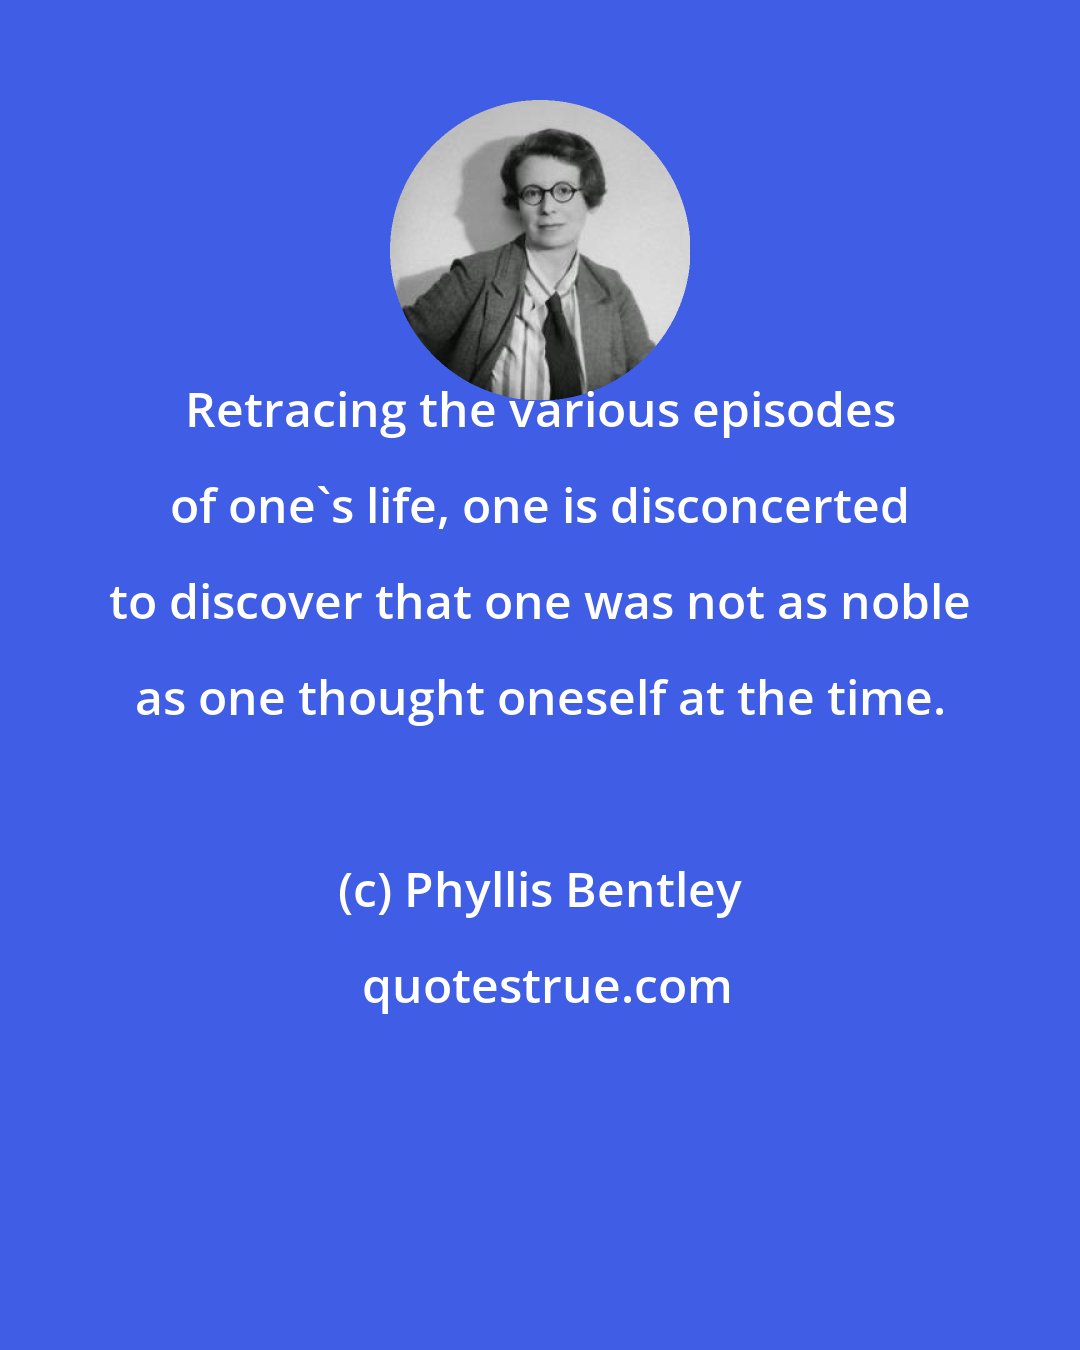 Phyllis Bentley: Retracing the various episodes of one's life, one is disconcerted to discover that one was not as noble as one thought oneself at the time.